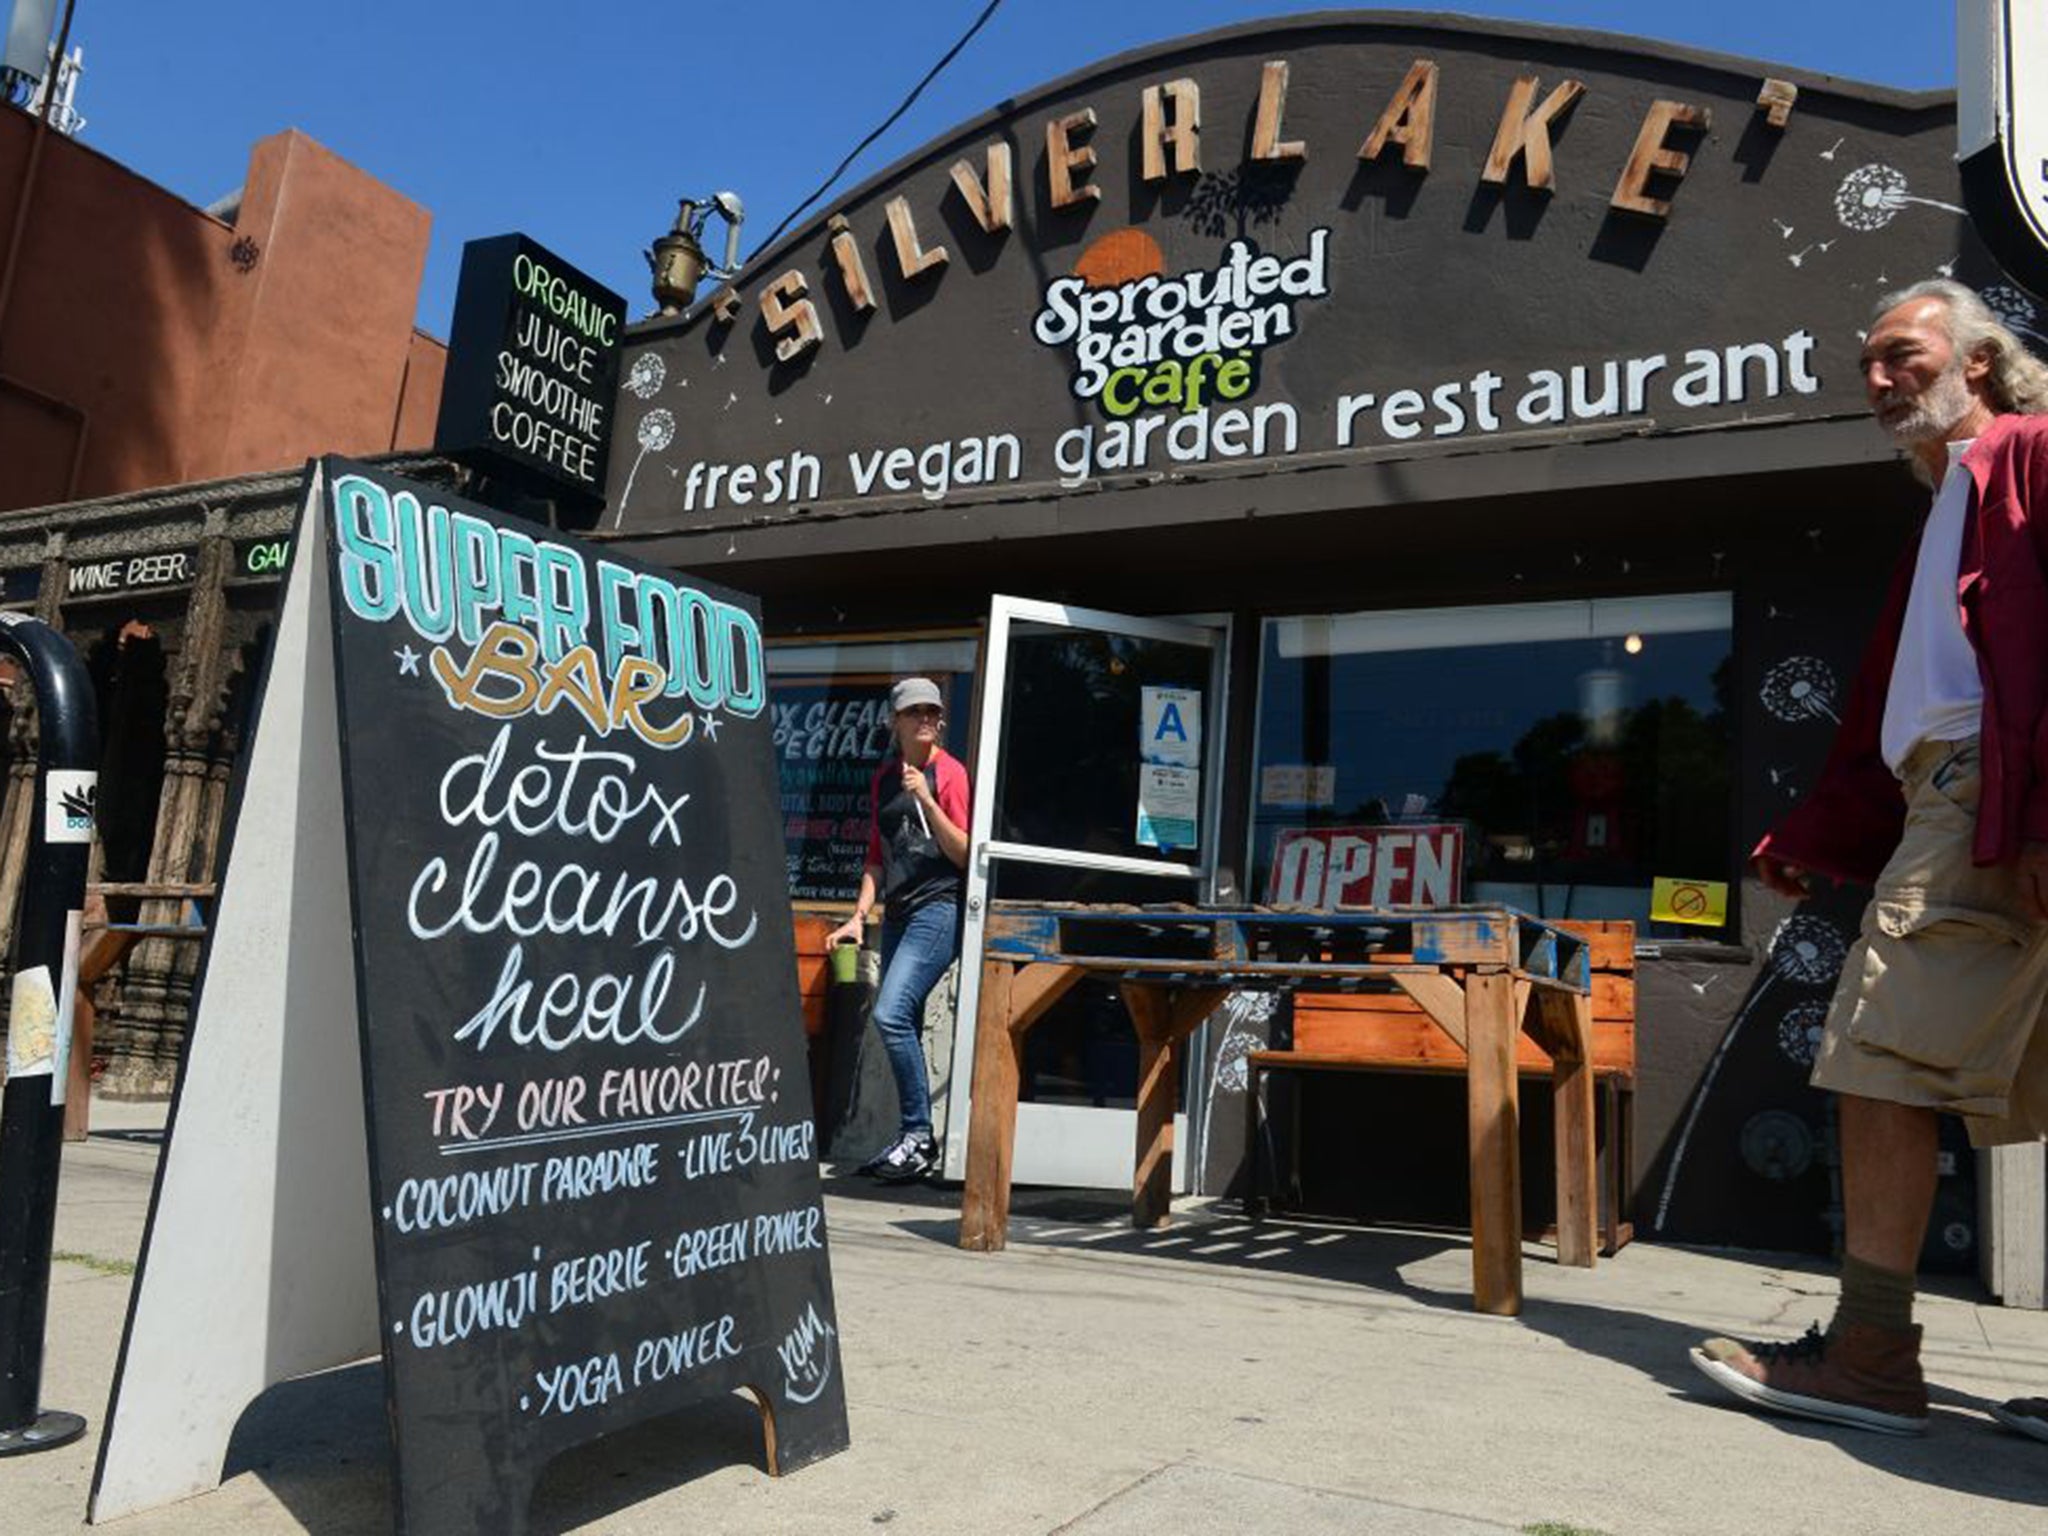 The residents of Silver Lake have been crying out for an organic supermarket